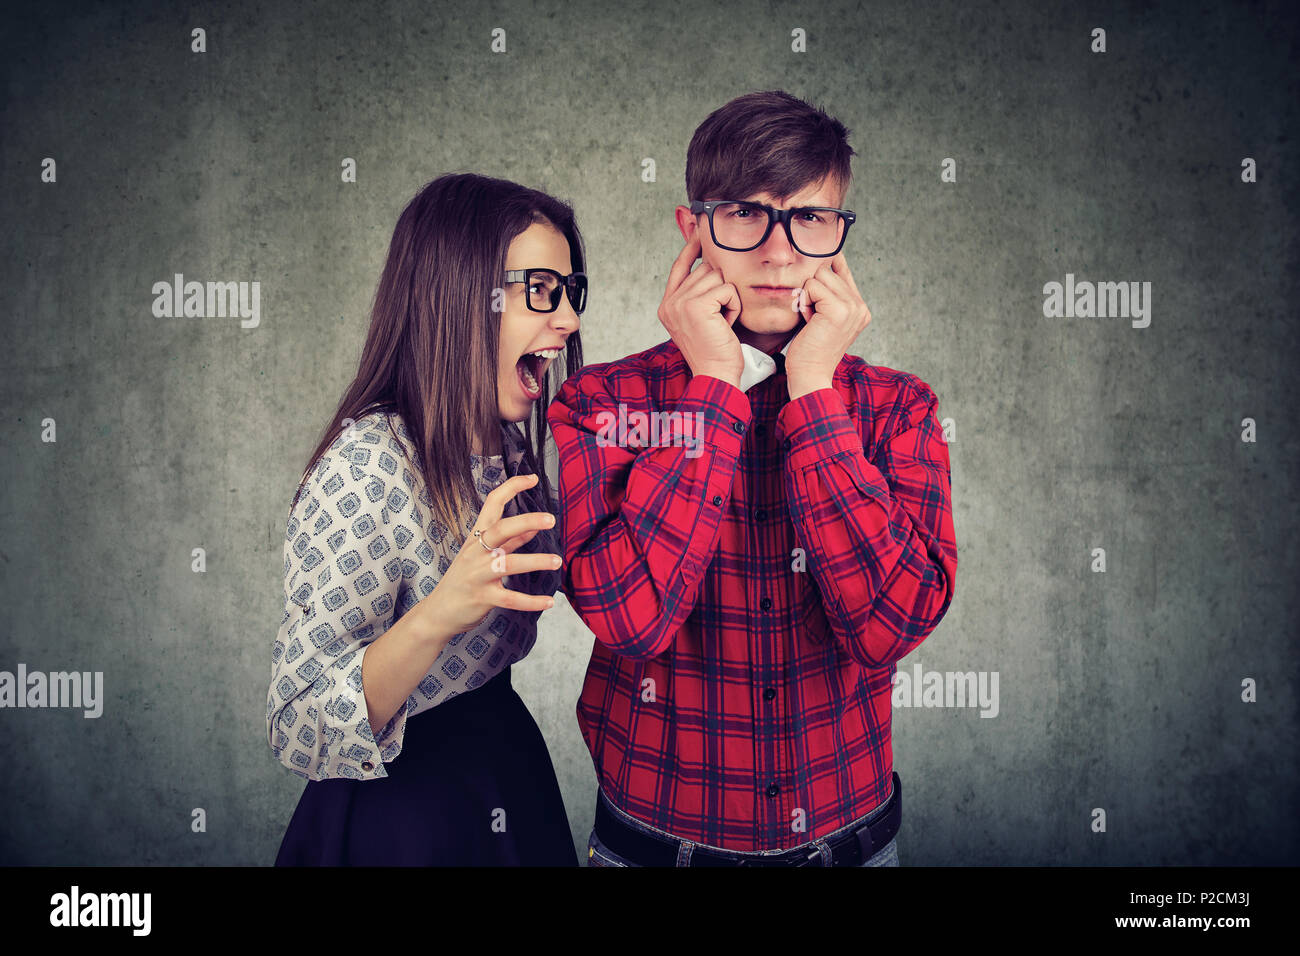 Woman screaming at man having big scandal while he covering ears in disagreement on gray backdrop. Stock Photo